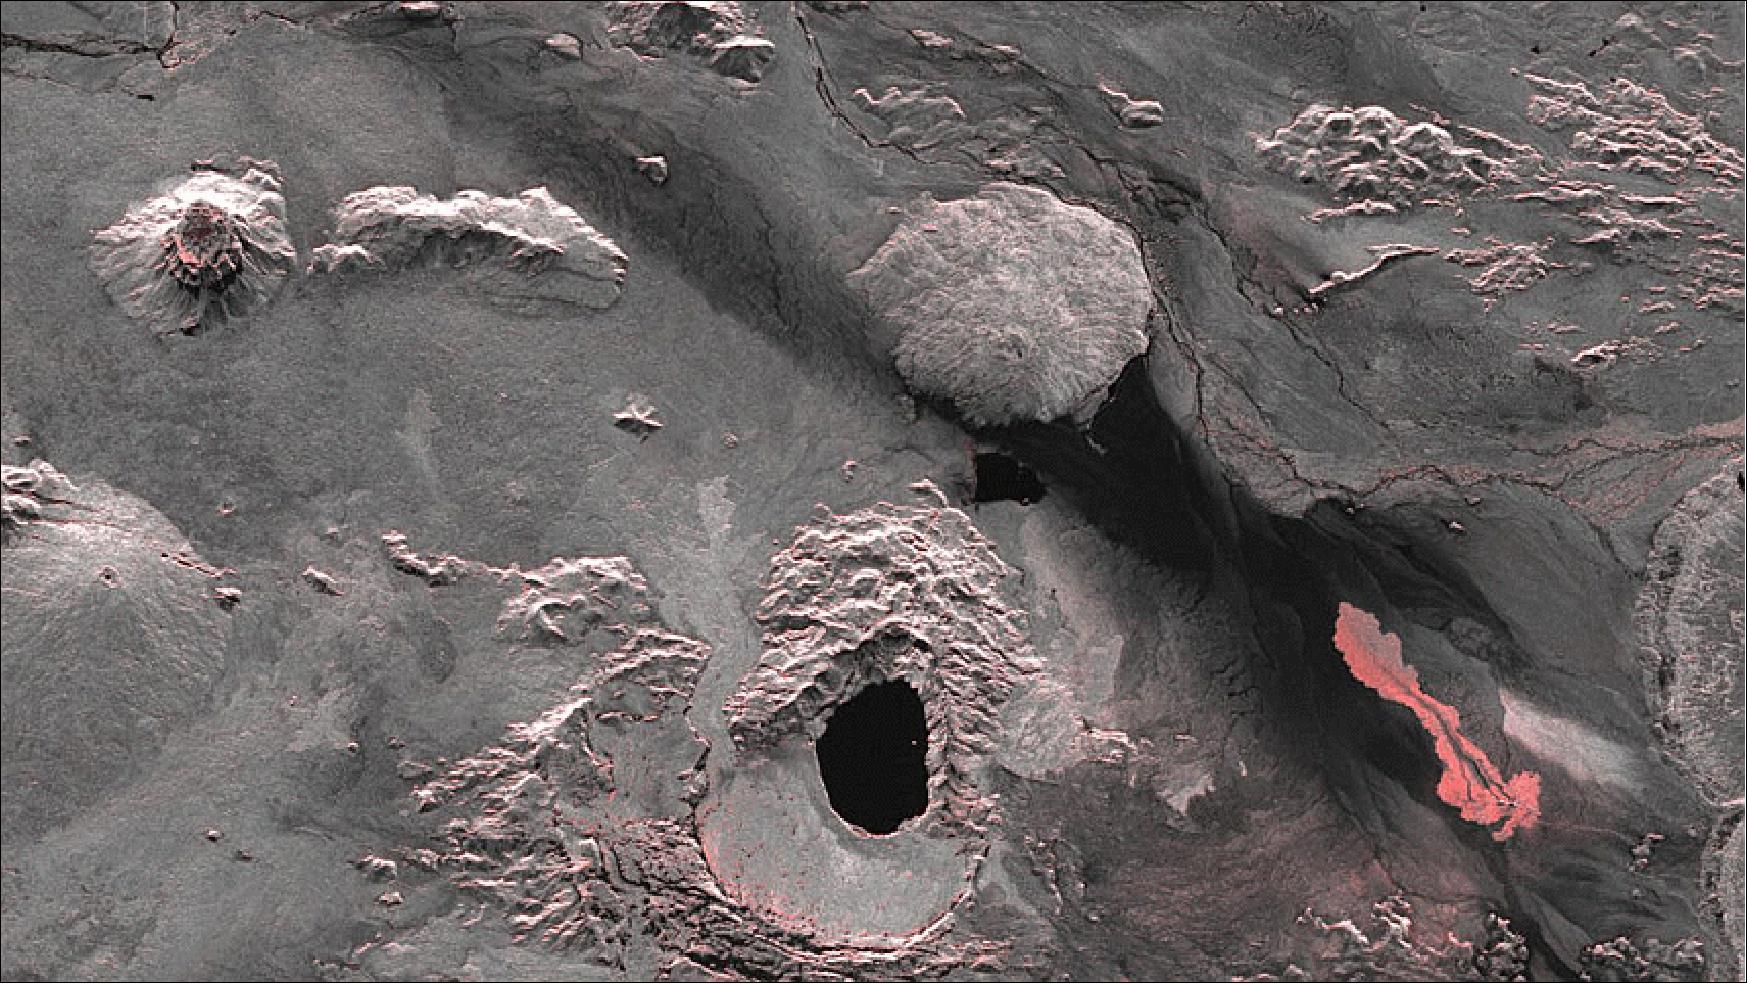 Figure 27: Image of the Bardarbunga crater area as observed by TerraSAR-X (image credit: DLR)